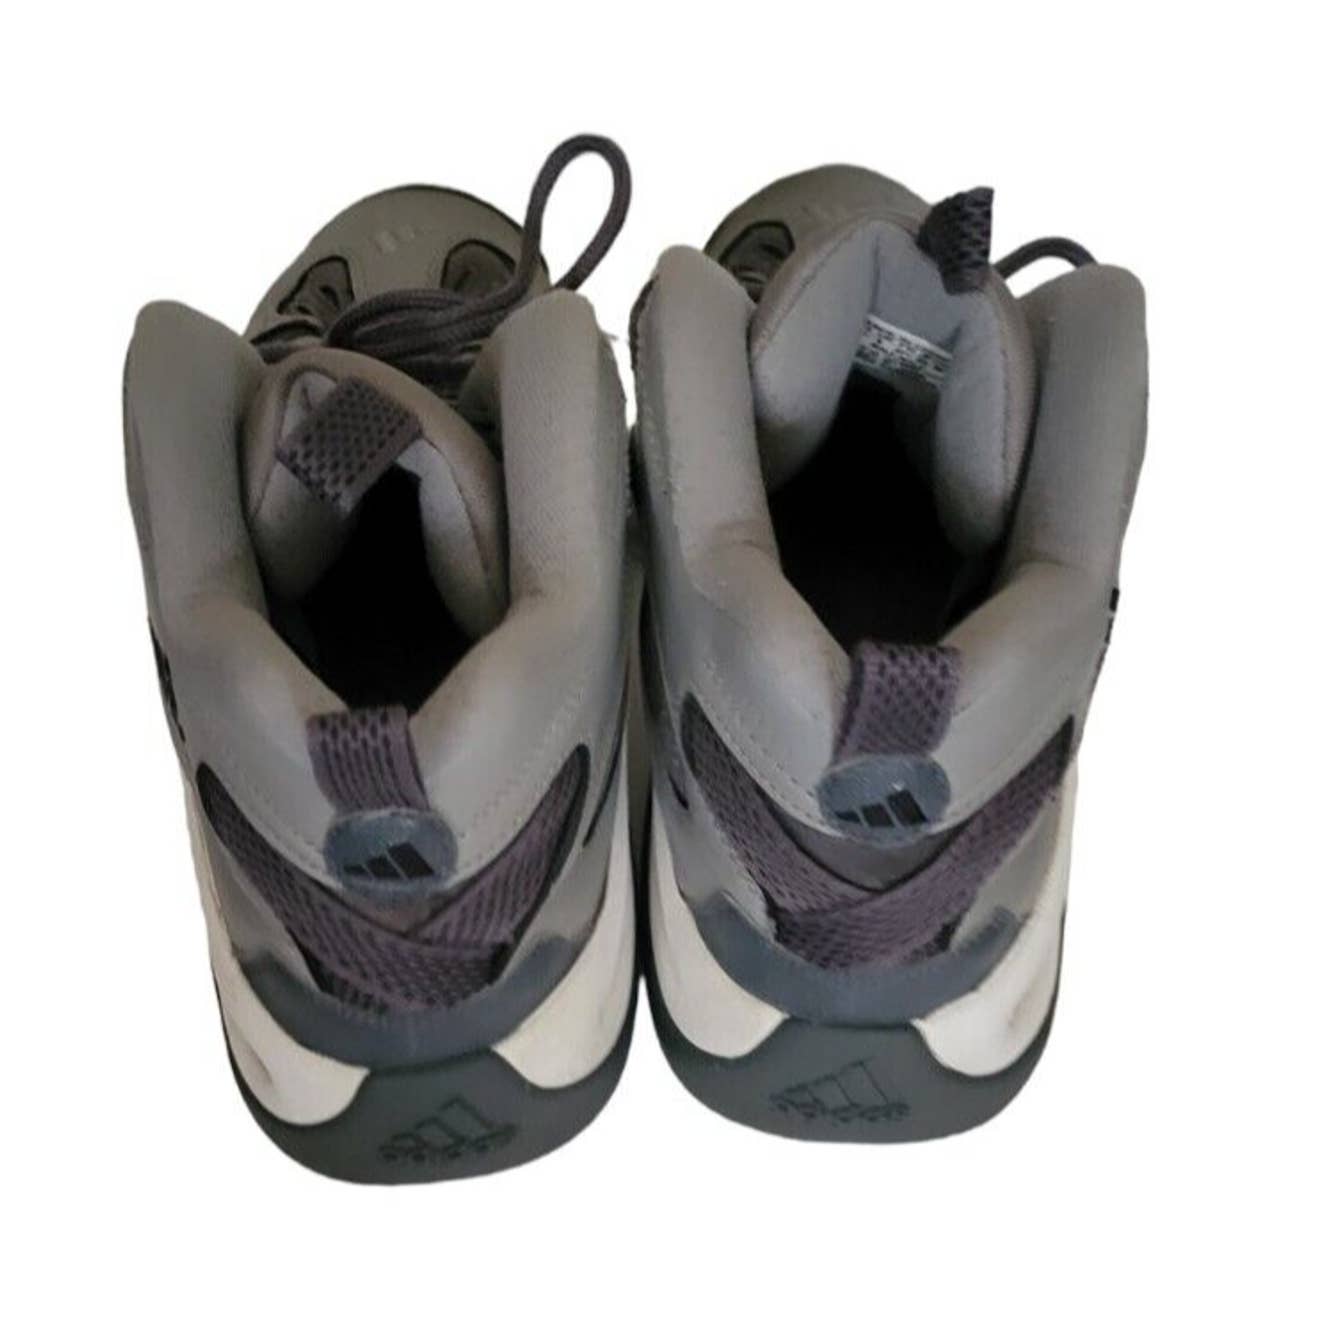 (Used) Adidas Kobe Crazy 8 1998 All-Star Game PE G48591 Black White Shoes LAKERS 9.5